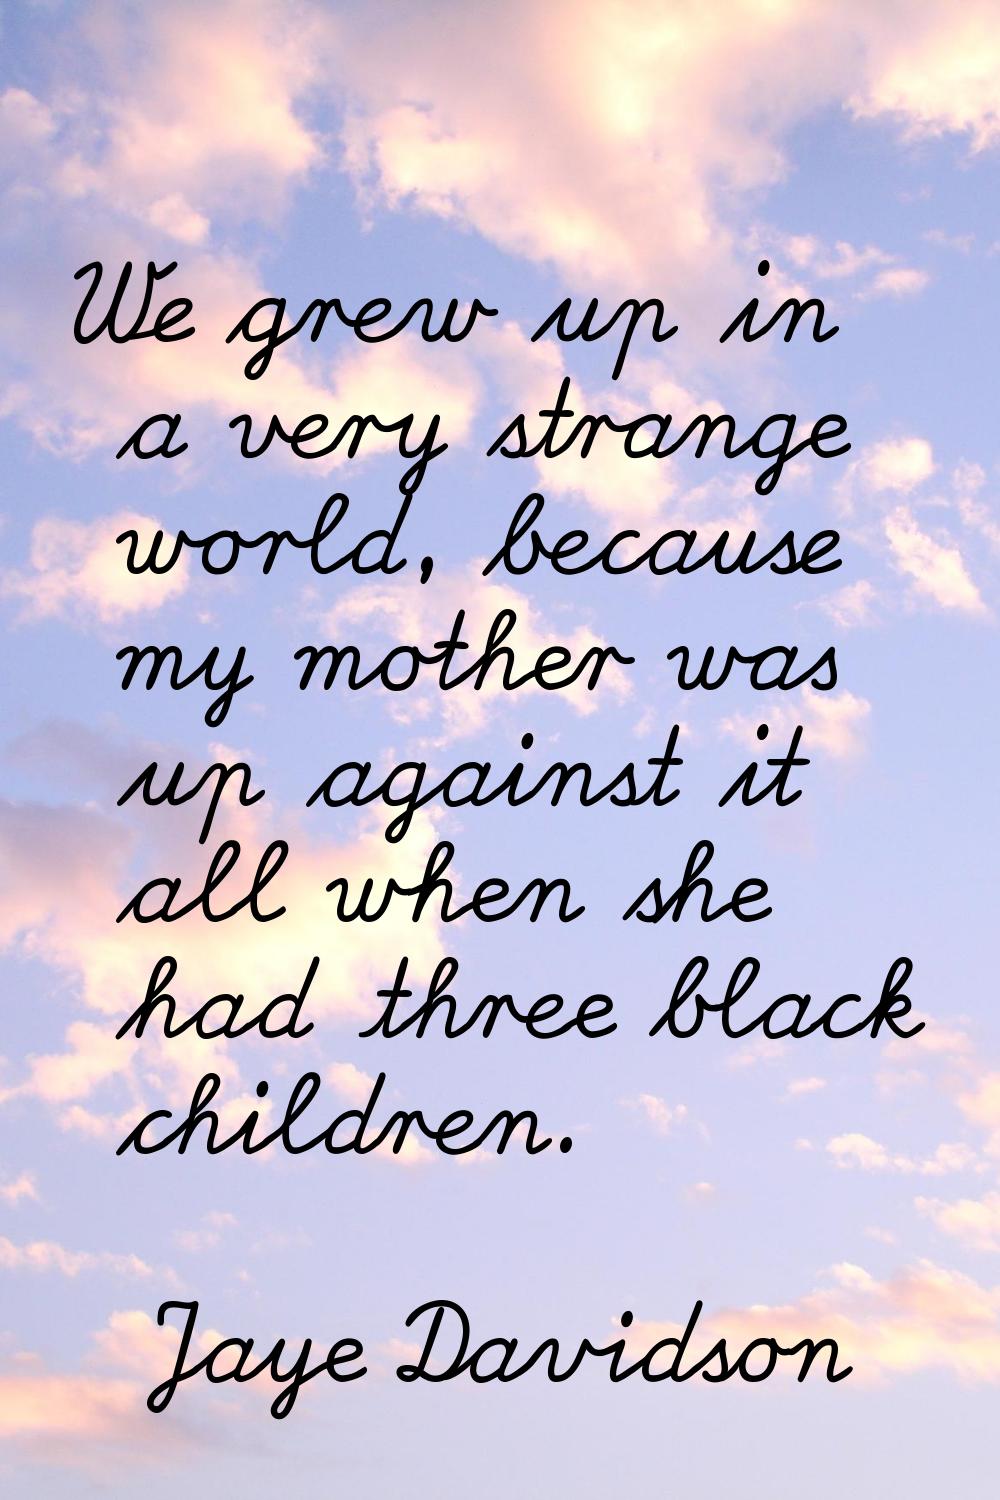 We grew up in a very strange world, because my mother was up against it all when she had three blac